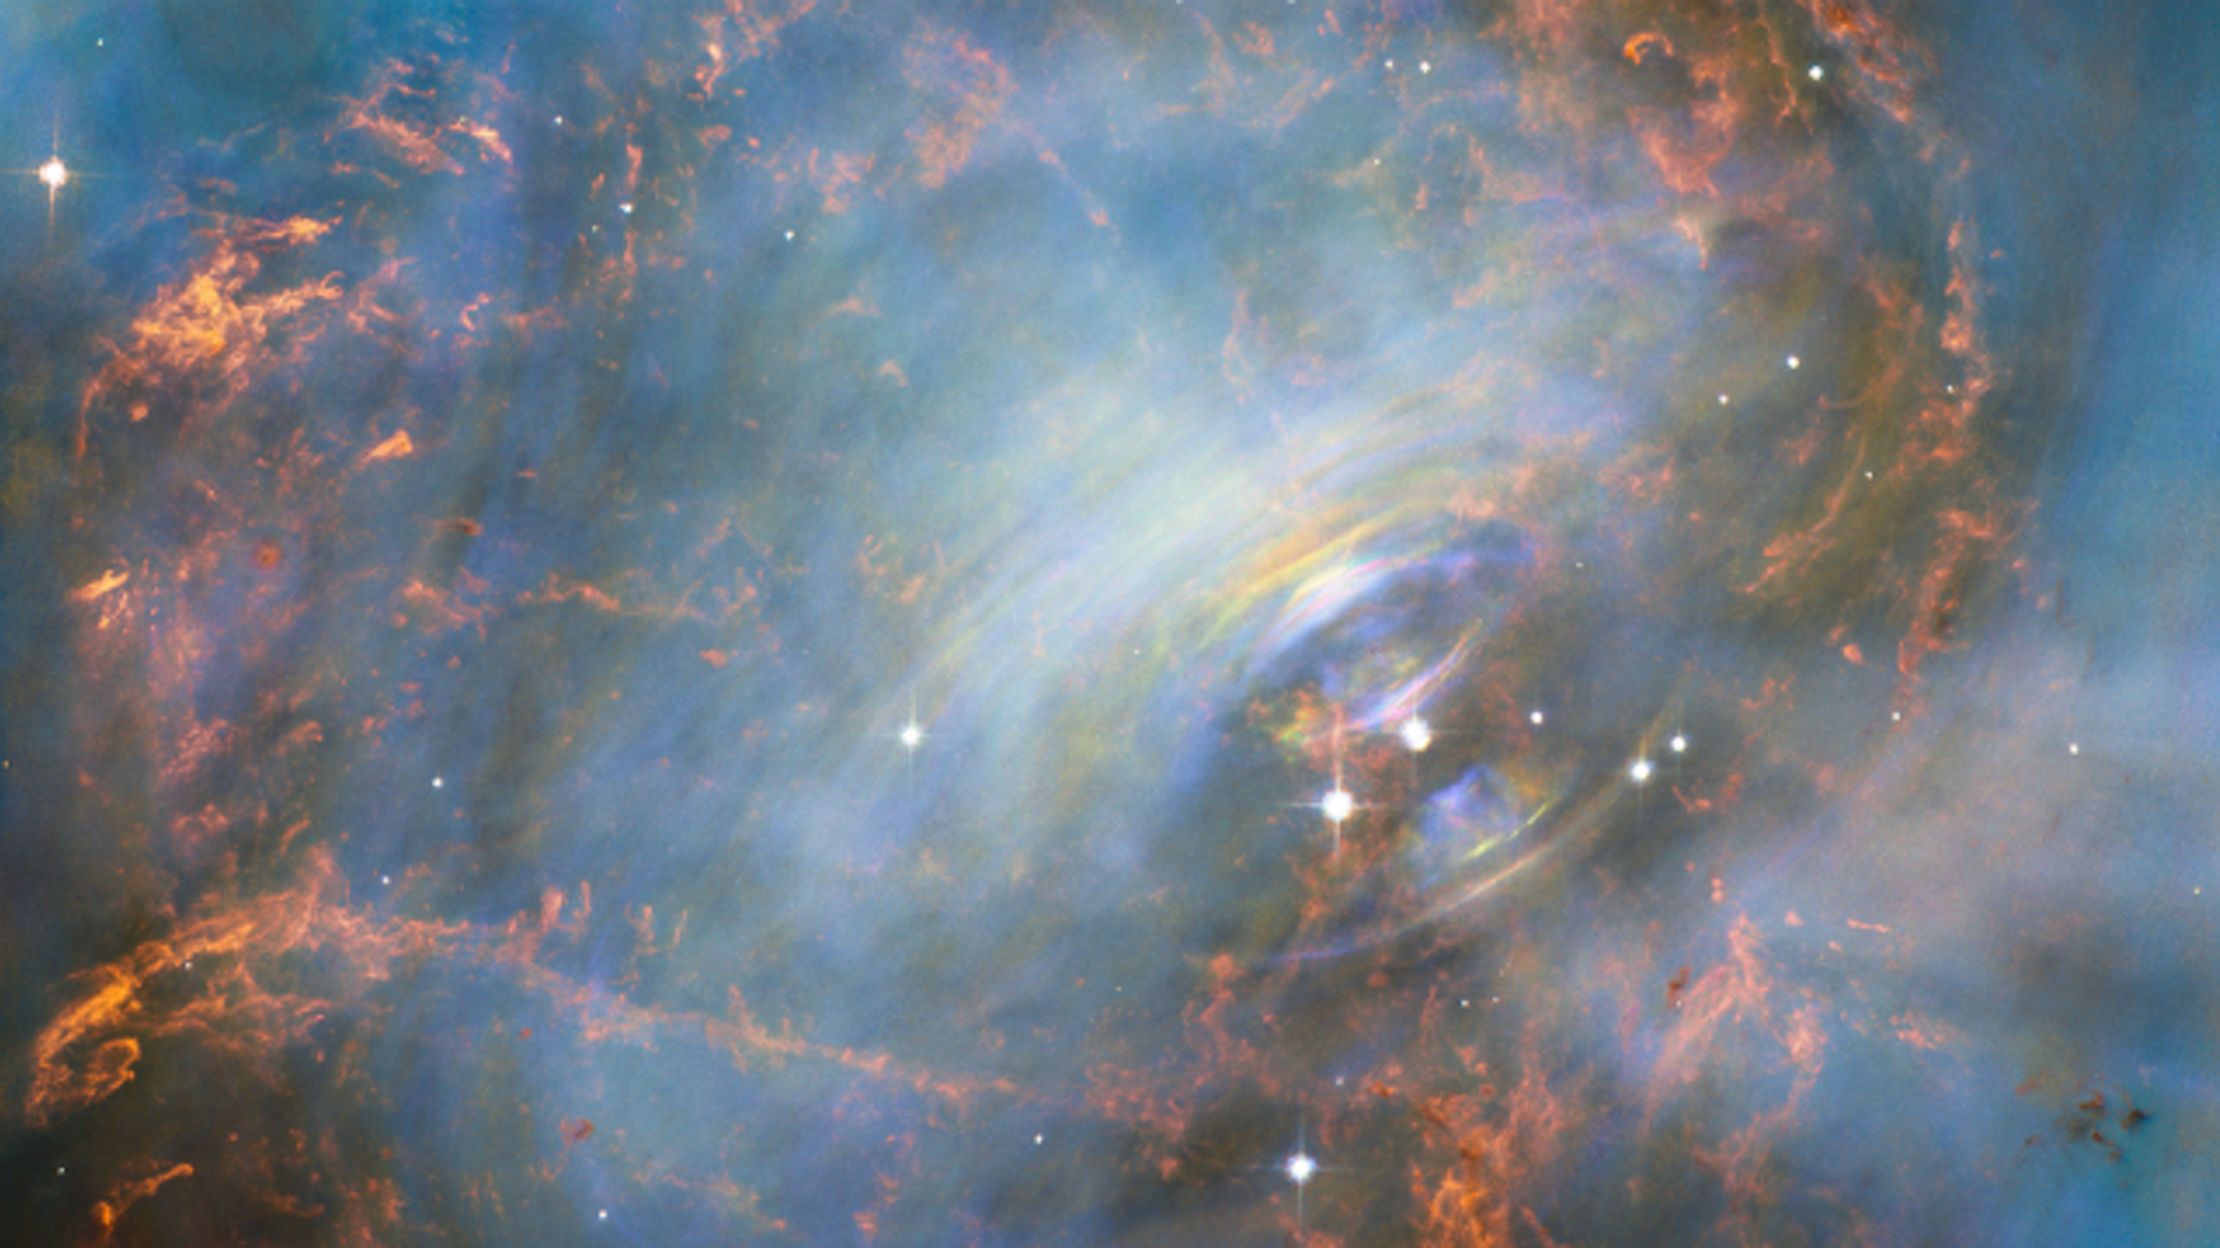 New Hubble Image Reveals the Beating Heart of the Crab Nebula